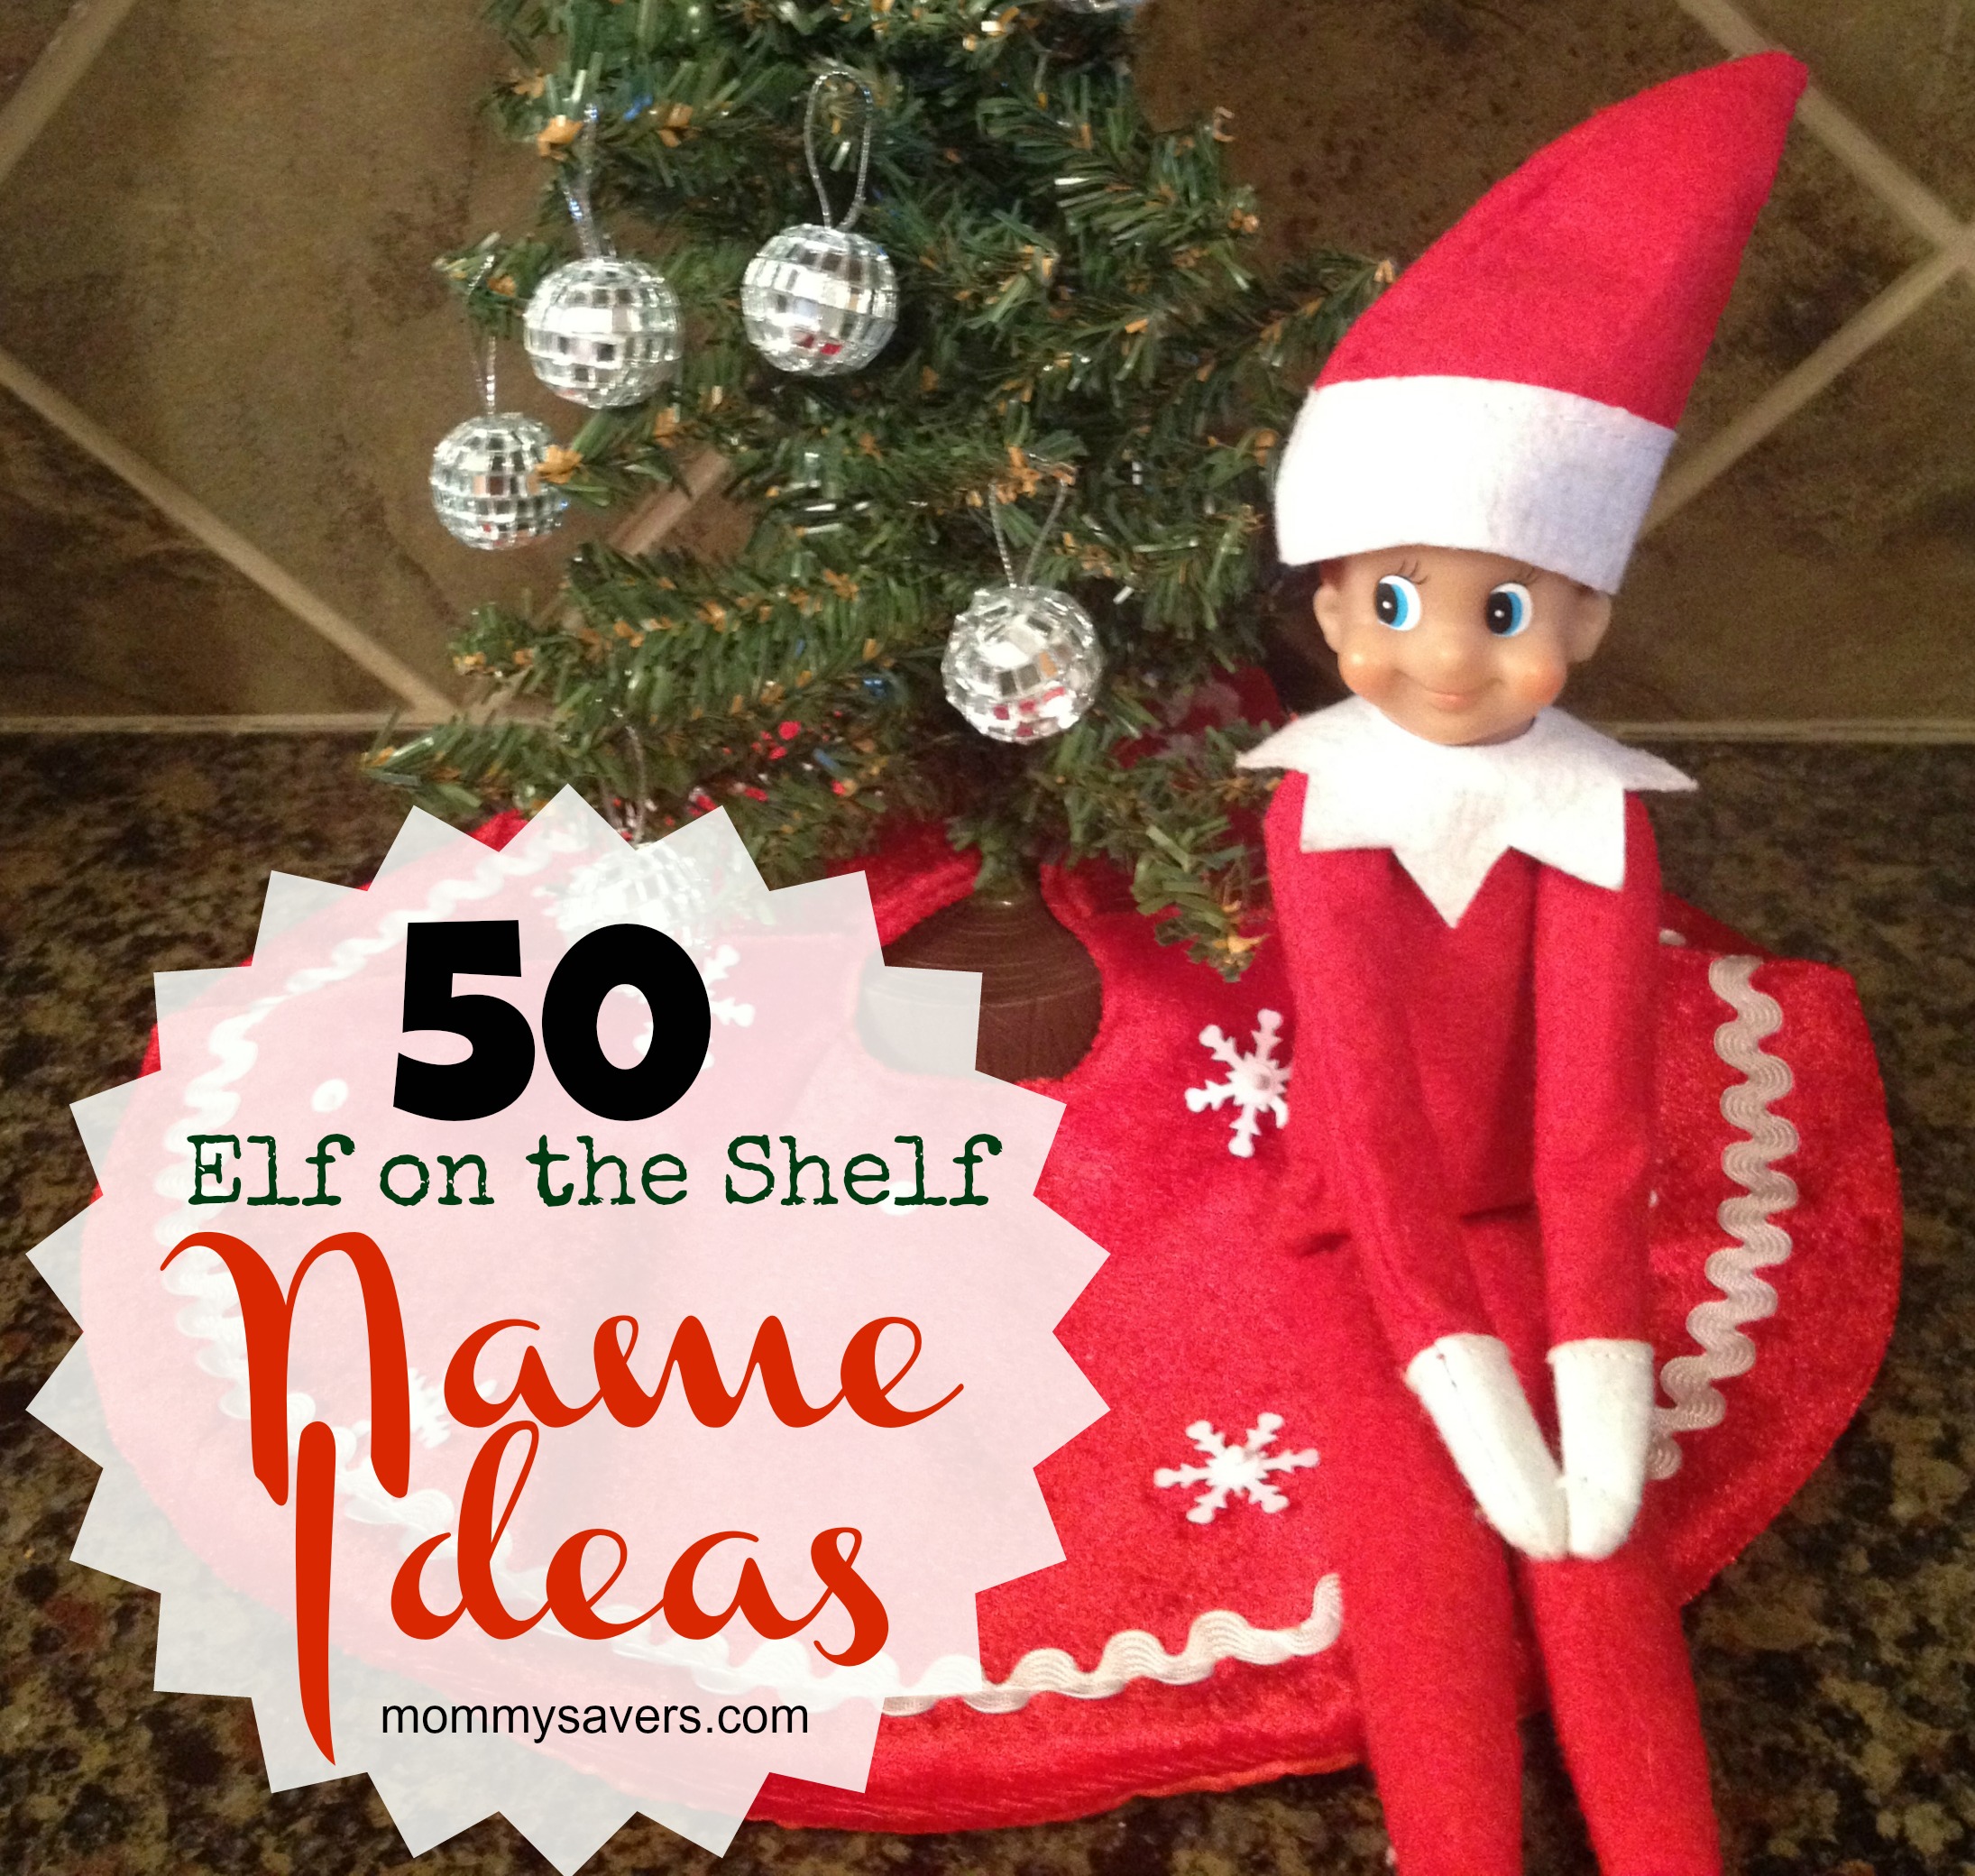 Elf on the Shelf Names: 50 Ideas for Boys and Girls - Mommysavers ...